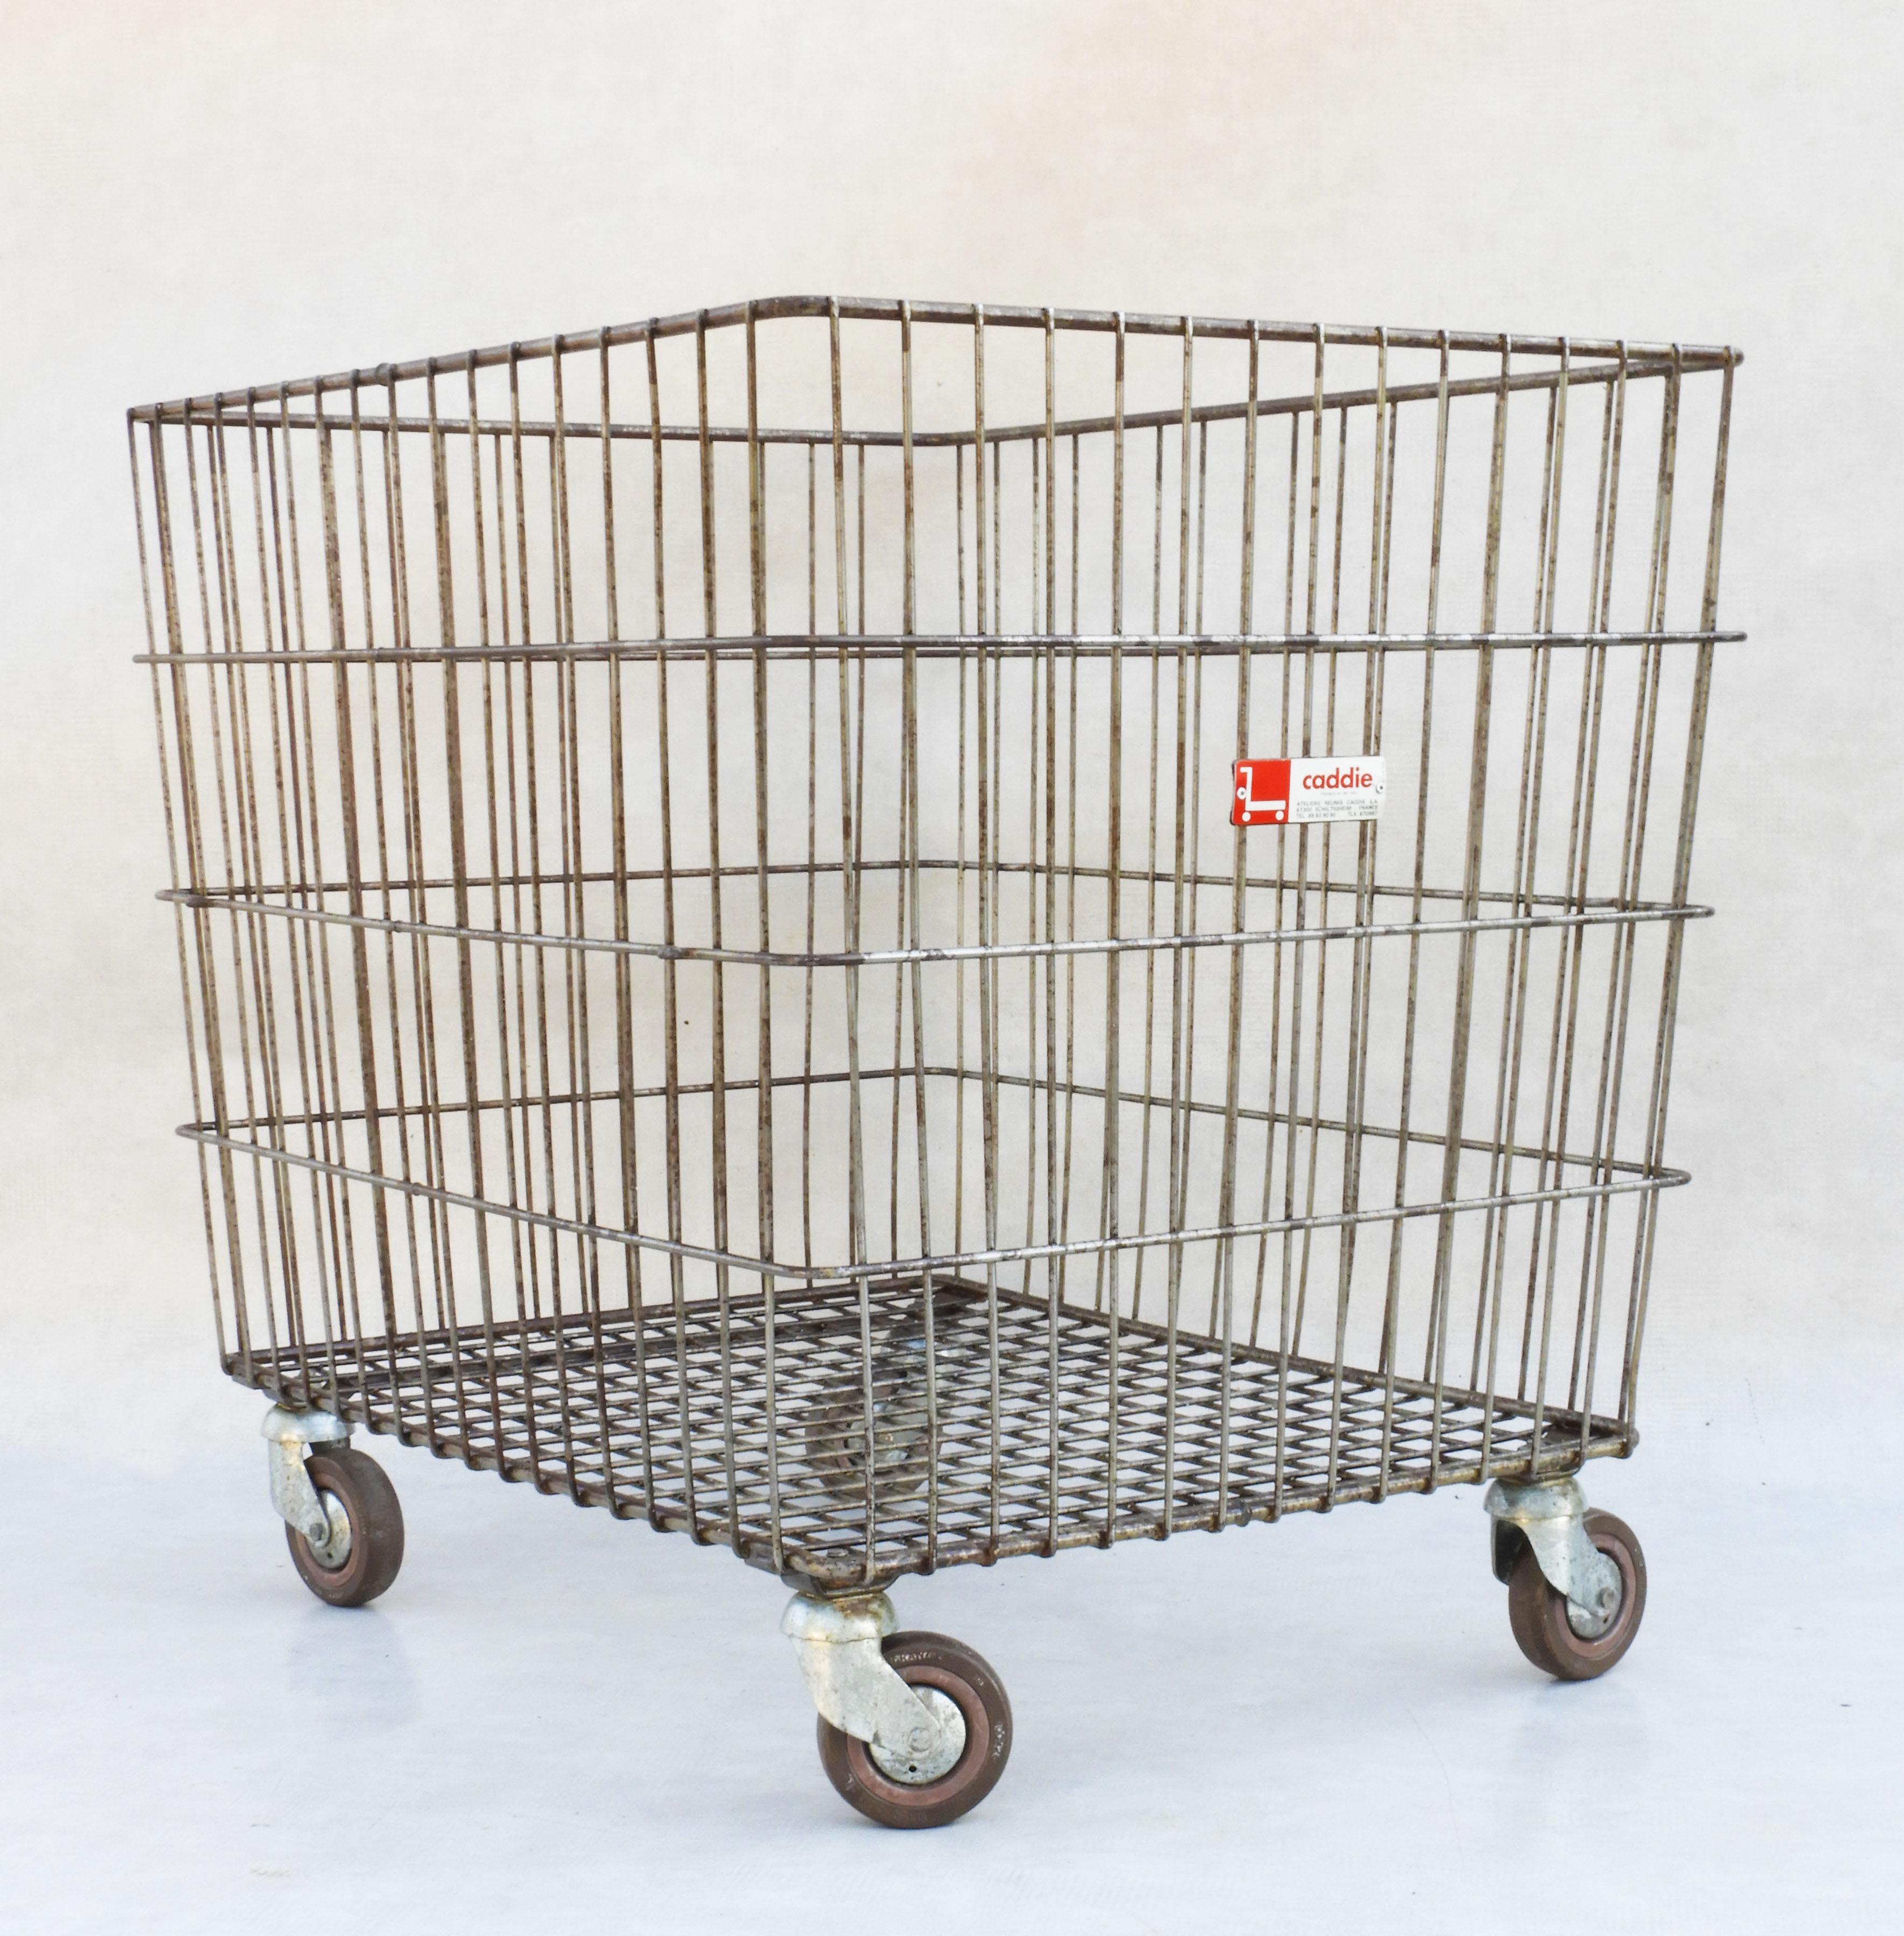 Large French industrial trolley cart from Caddie France.
Great mid-century basket in heavy gauge wire mesh on multidirectional wheels. 
Versatile and practical, indoors or out, great for storage of toys, firewood, linens, towels etc. With the